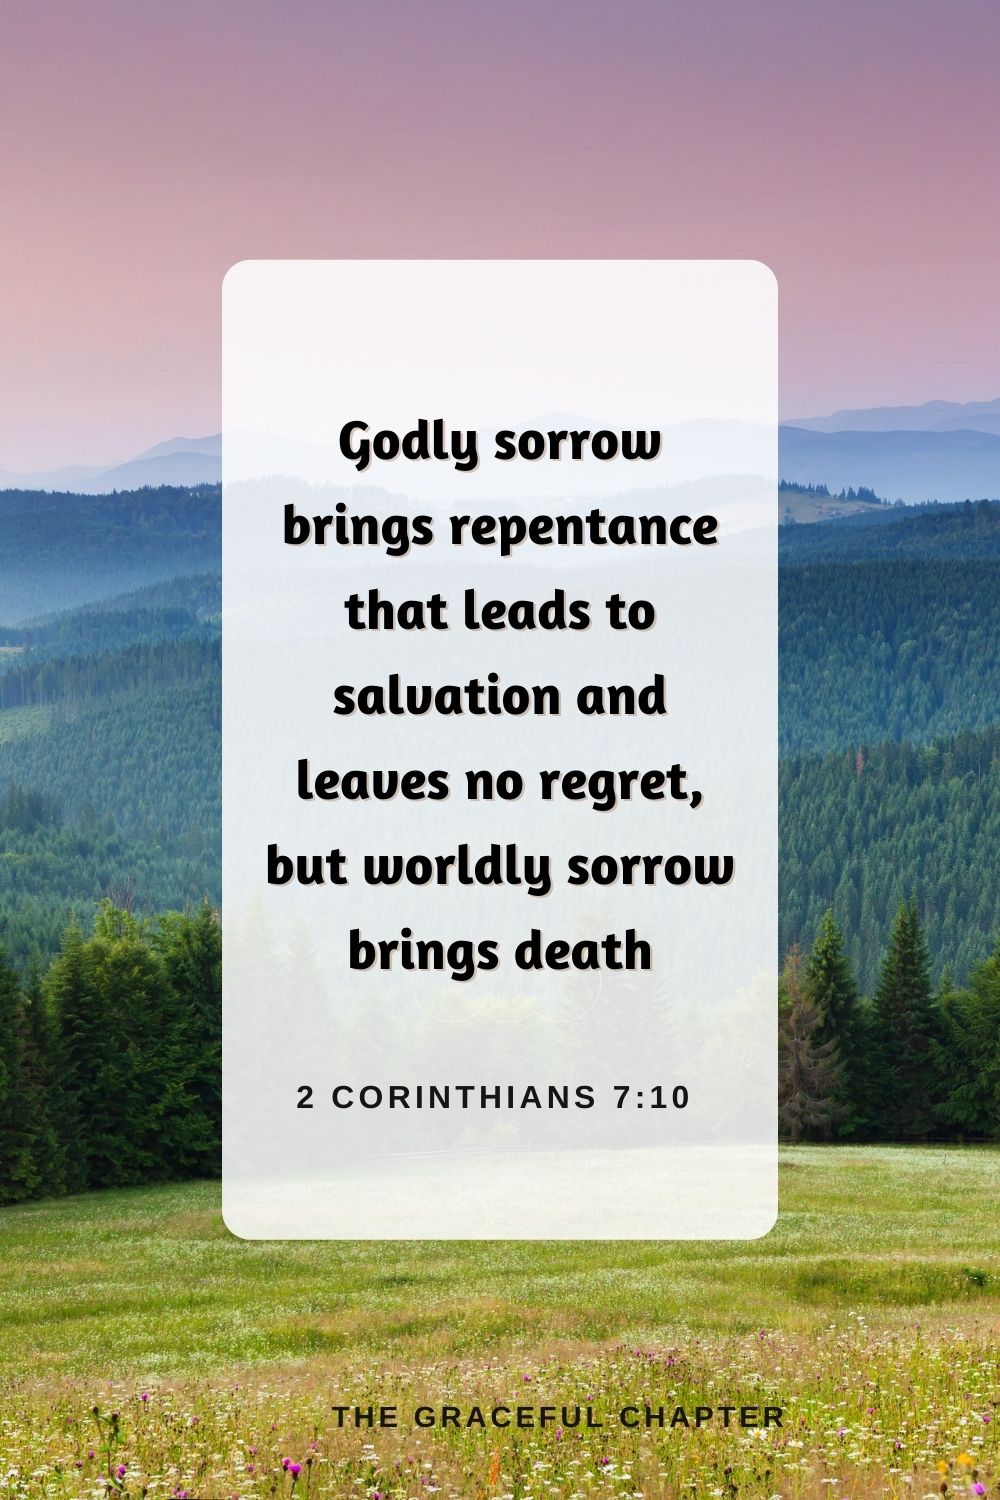 Godly sorrow brings repentance that leads to salvation and leaves no regret, but worldly sorrow brings death